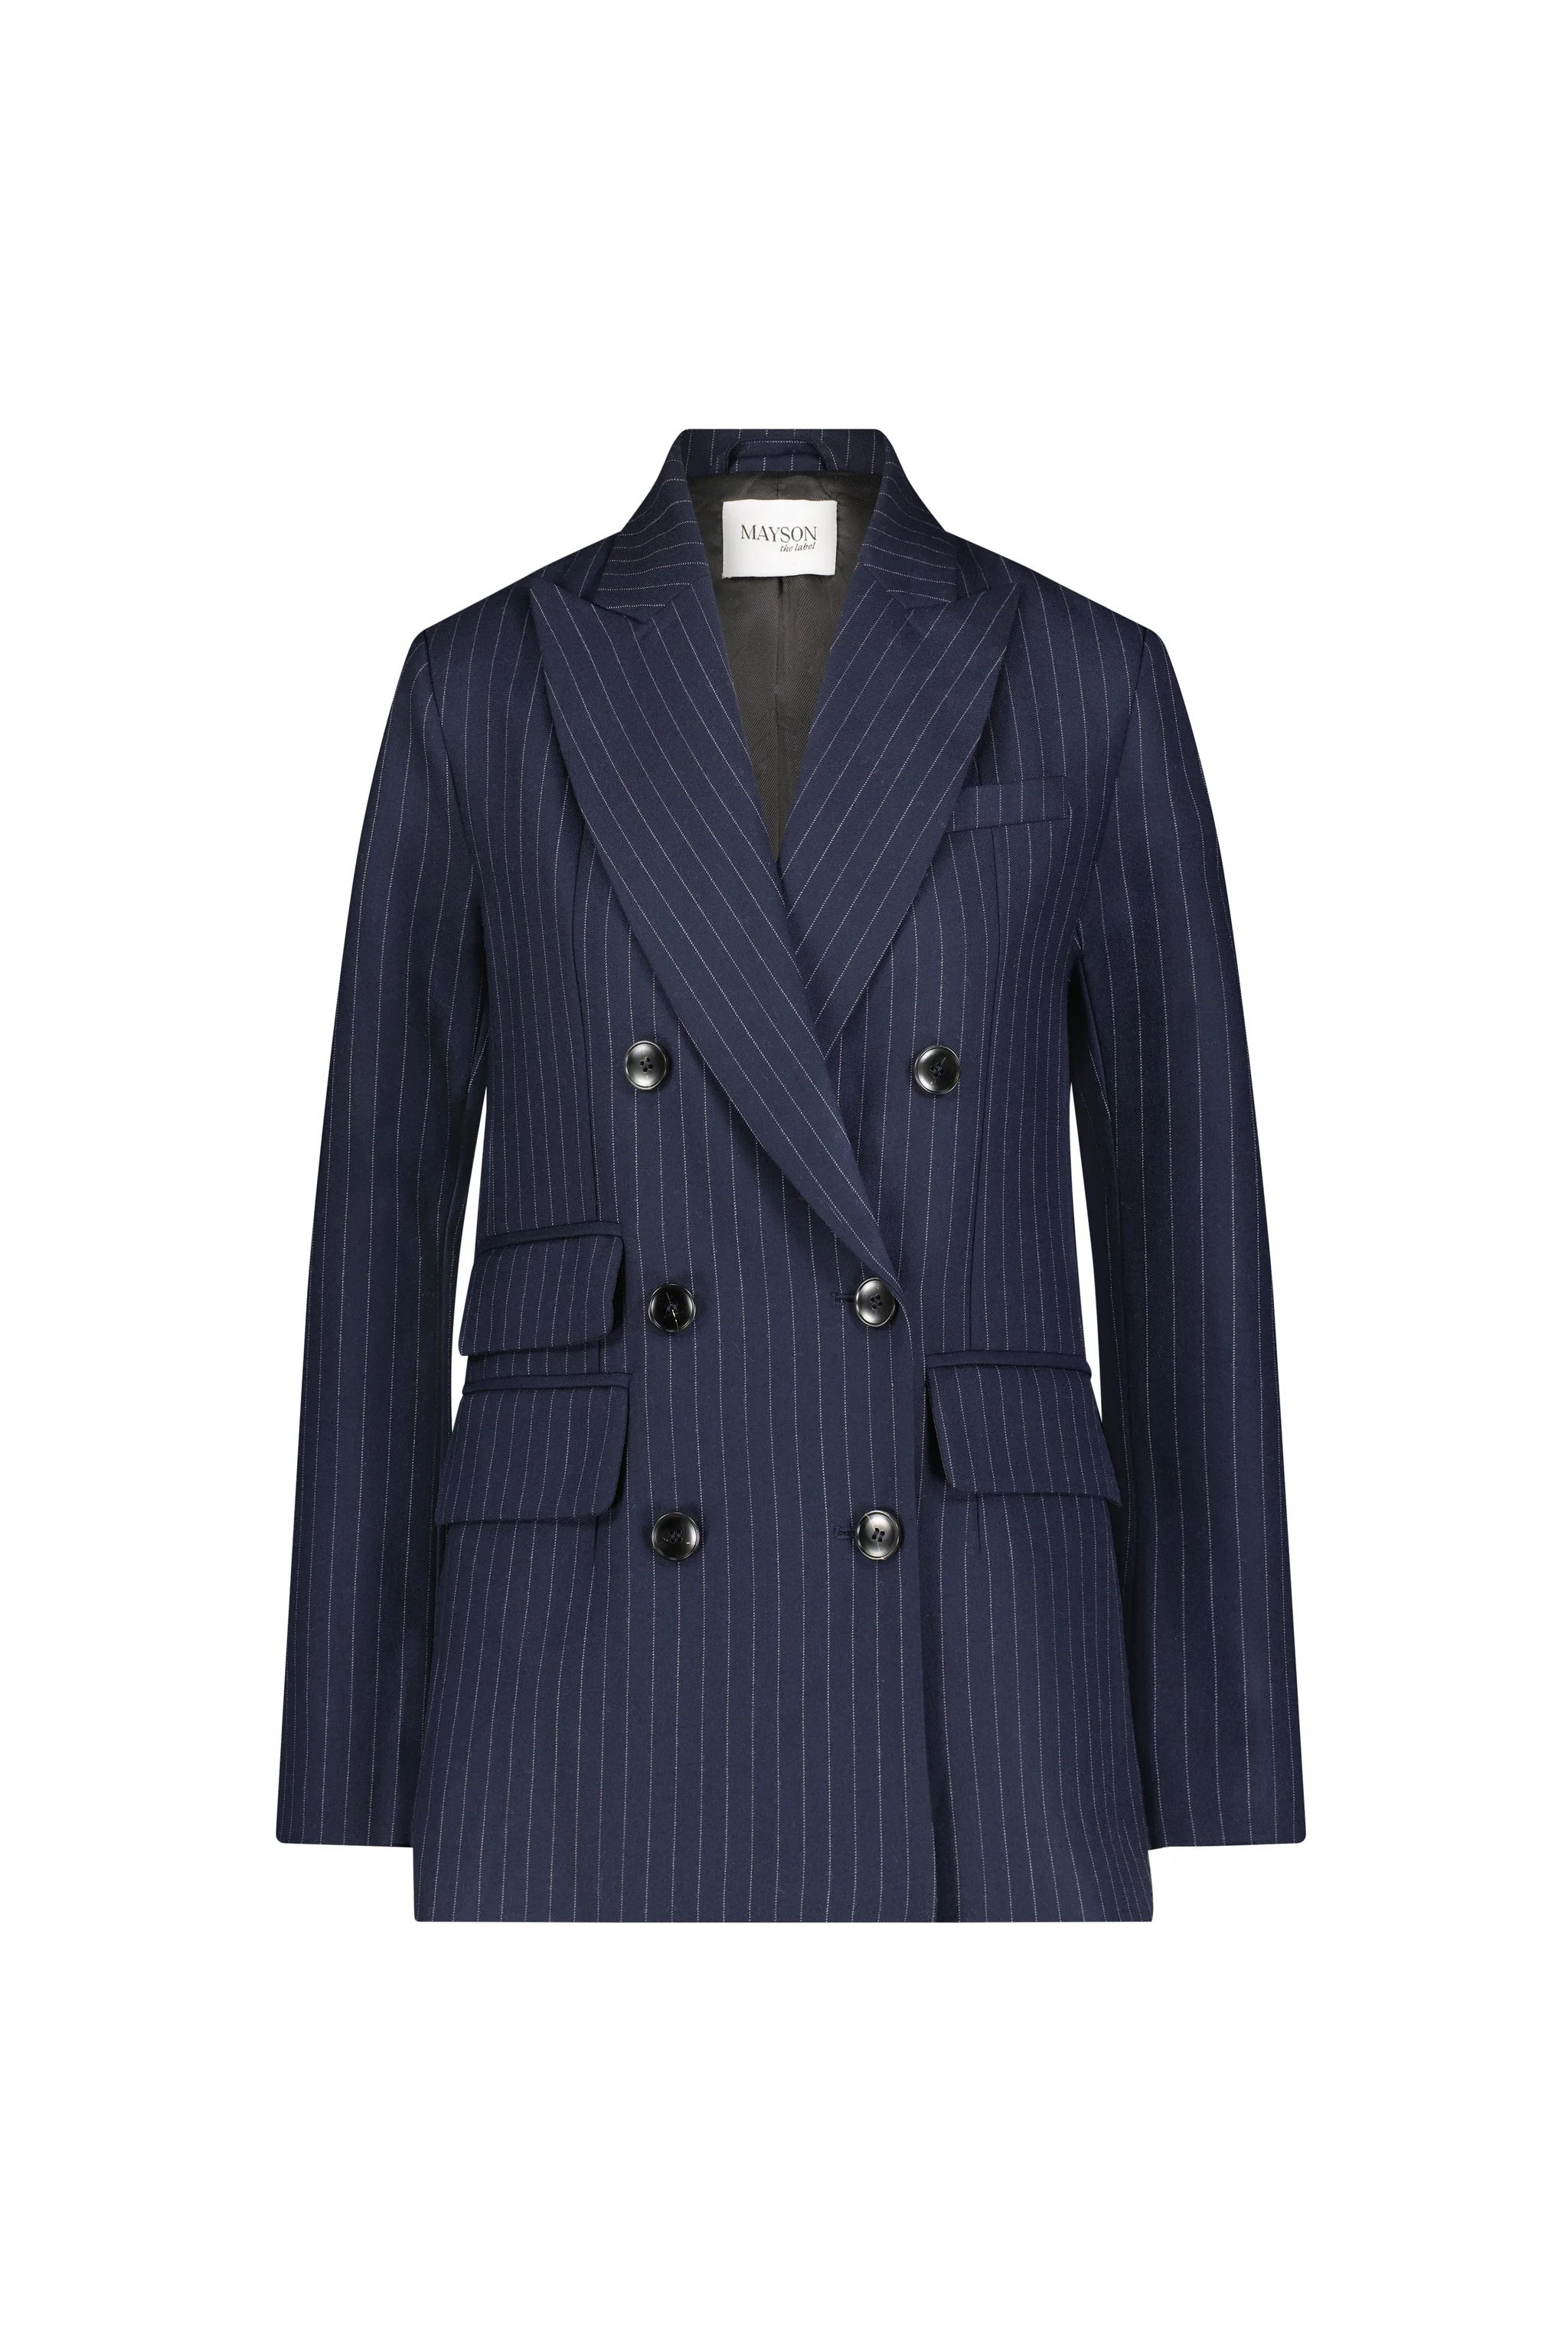 Pinstripe Wool Twill Double Breasted Blazer | MAYSON the label